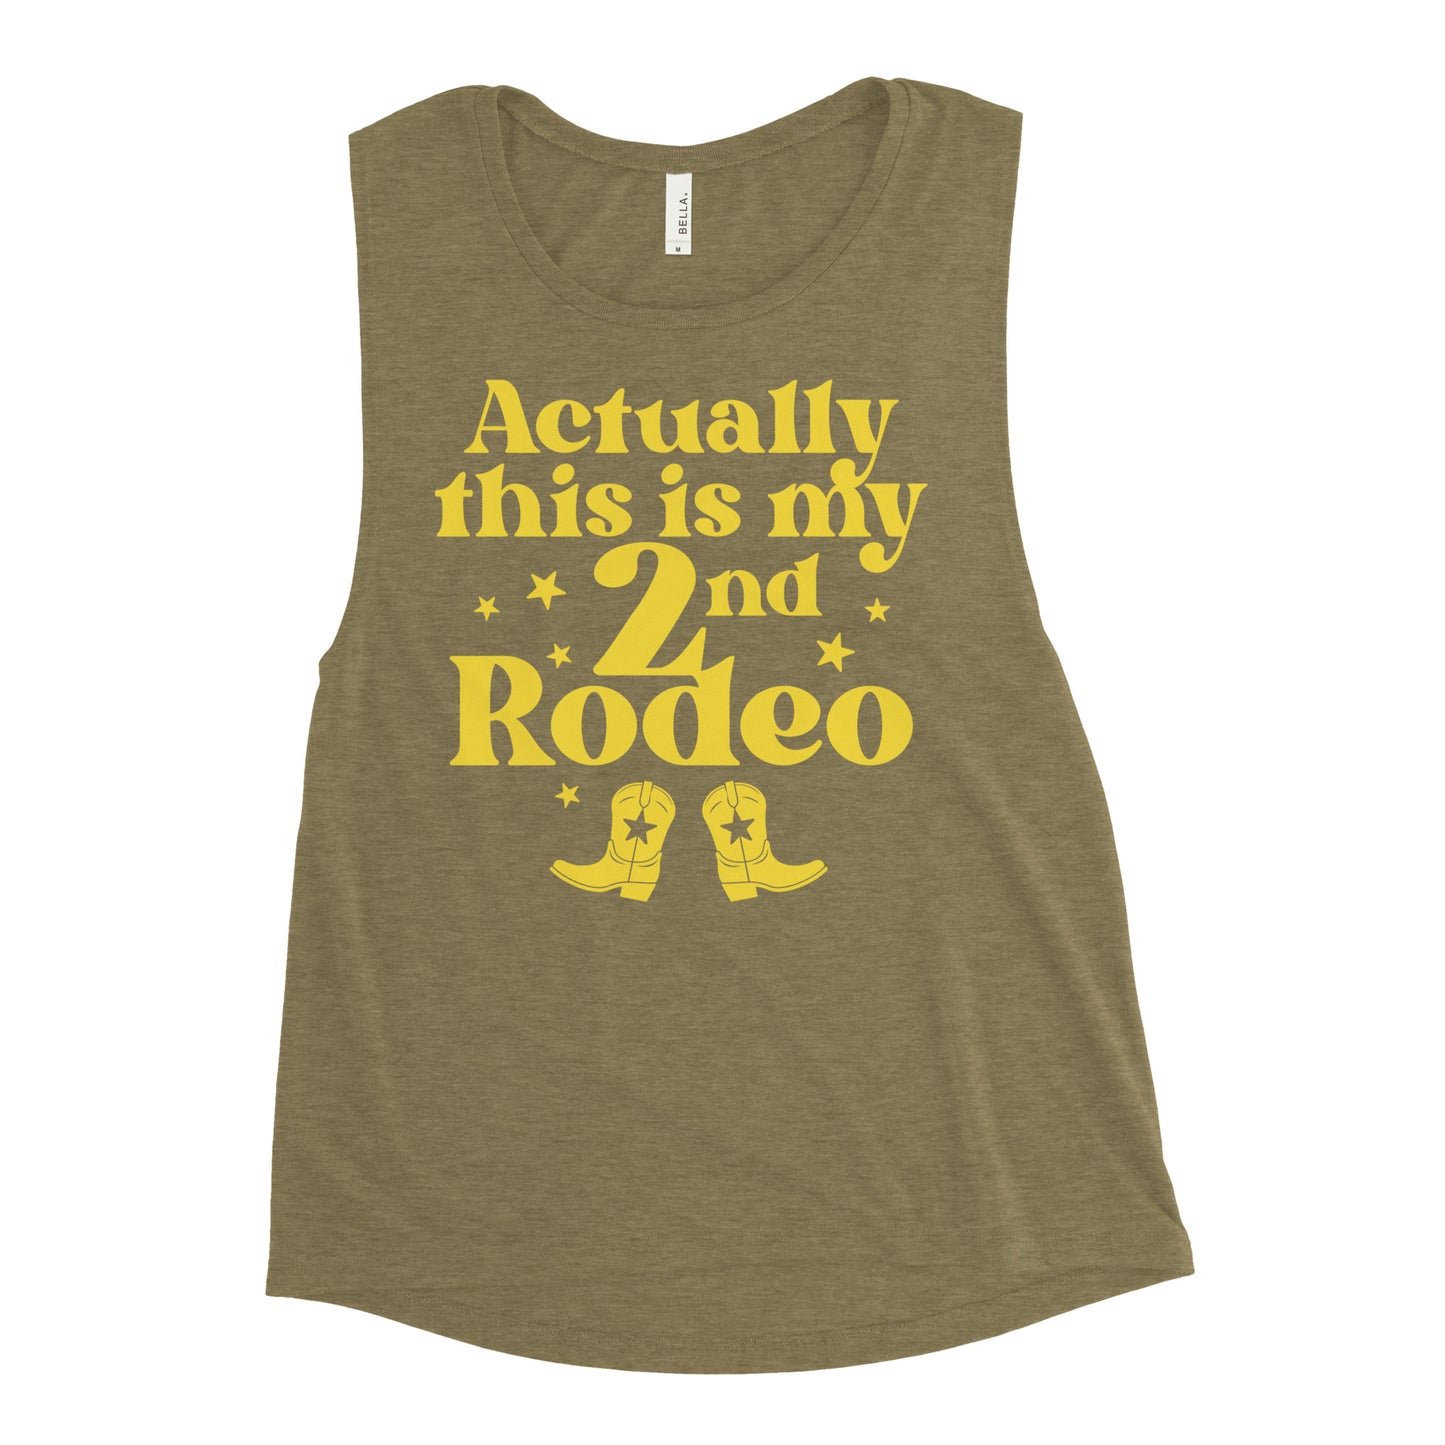 Actually This Is My 2nd Rodeo Women's Muscle Tank